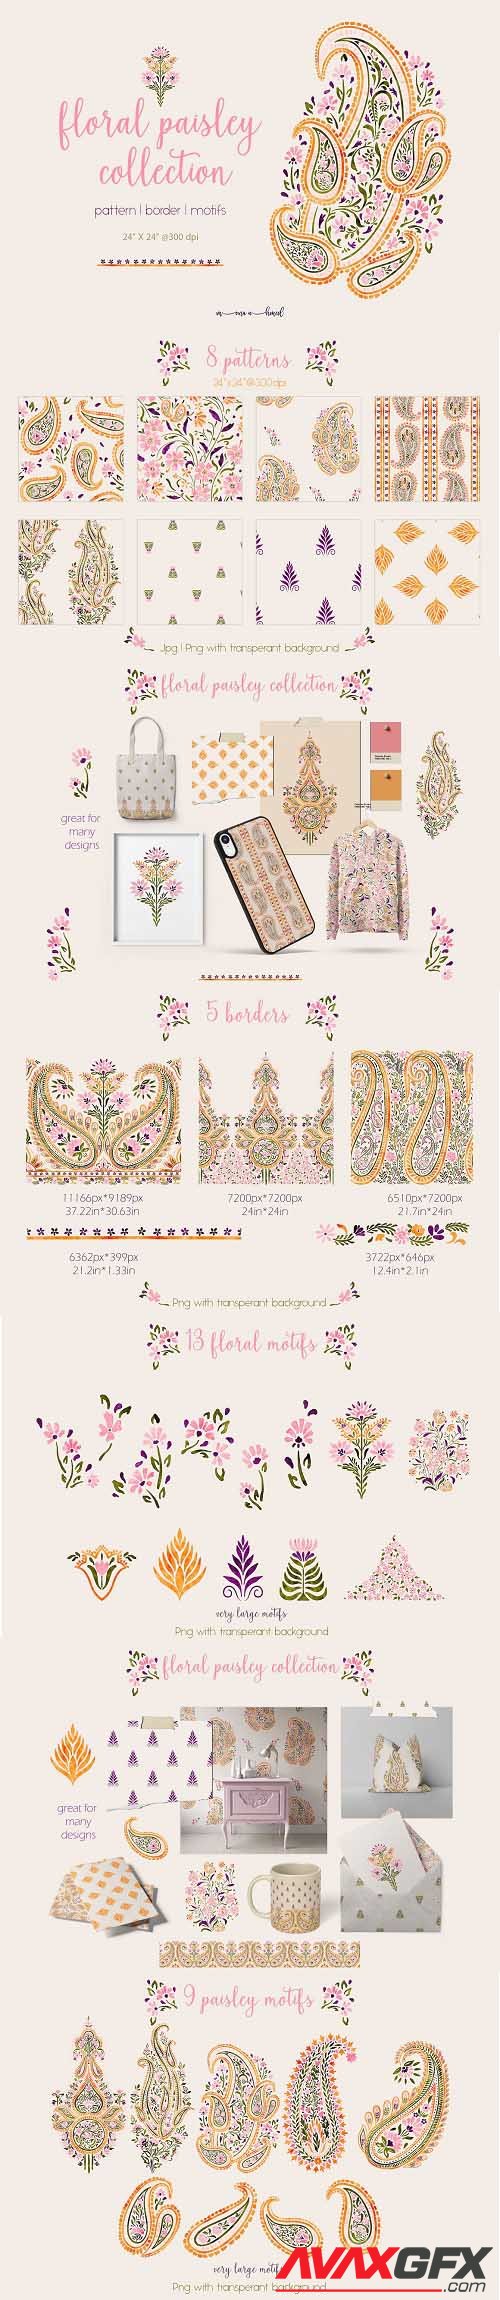 Floral paisley collection - 6828392